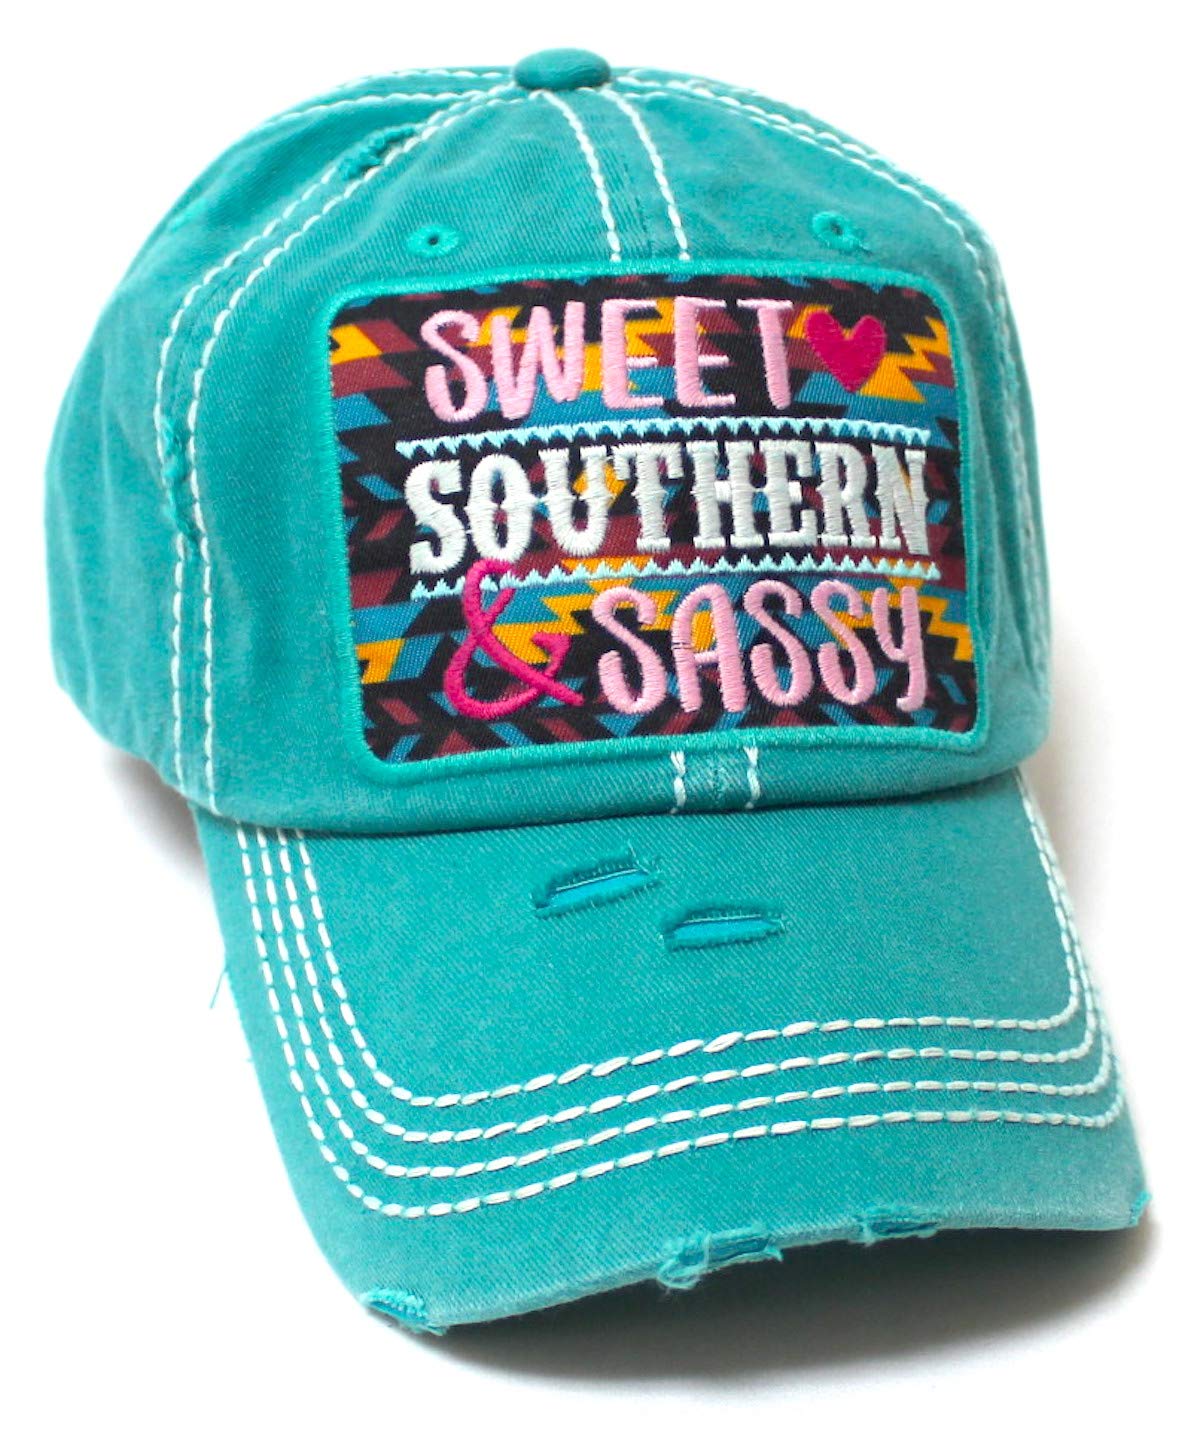 Women's Baseball Cap Sweet, Southern & Sassy Tribal Aztec Pattern Patch Embroidery Monogram Hat, Pretty Turquoise